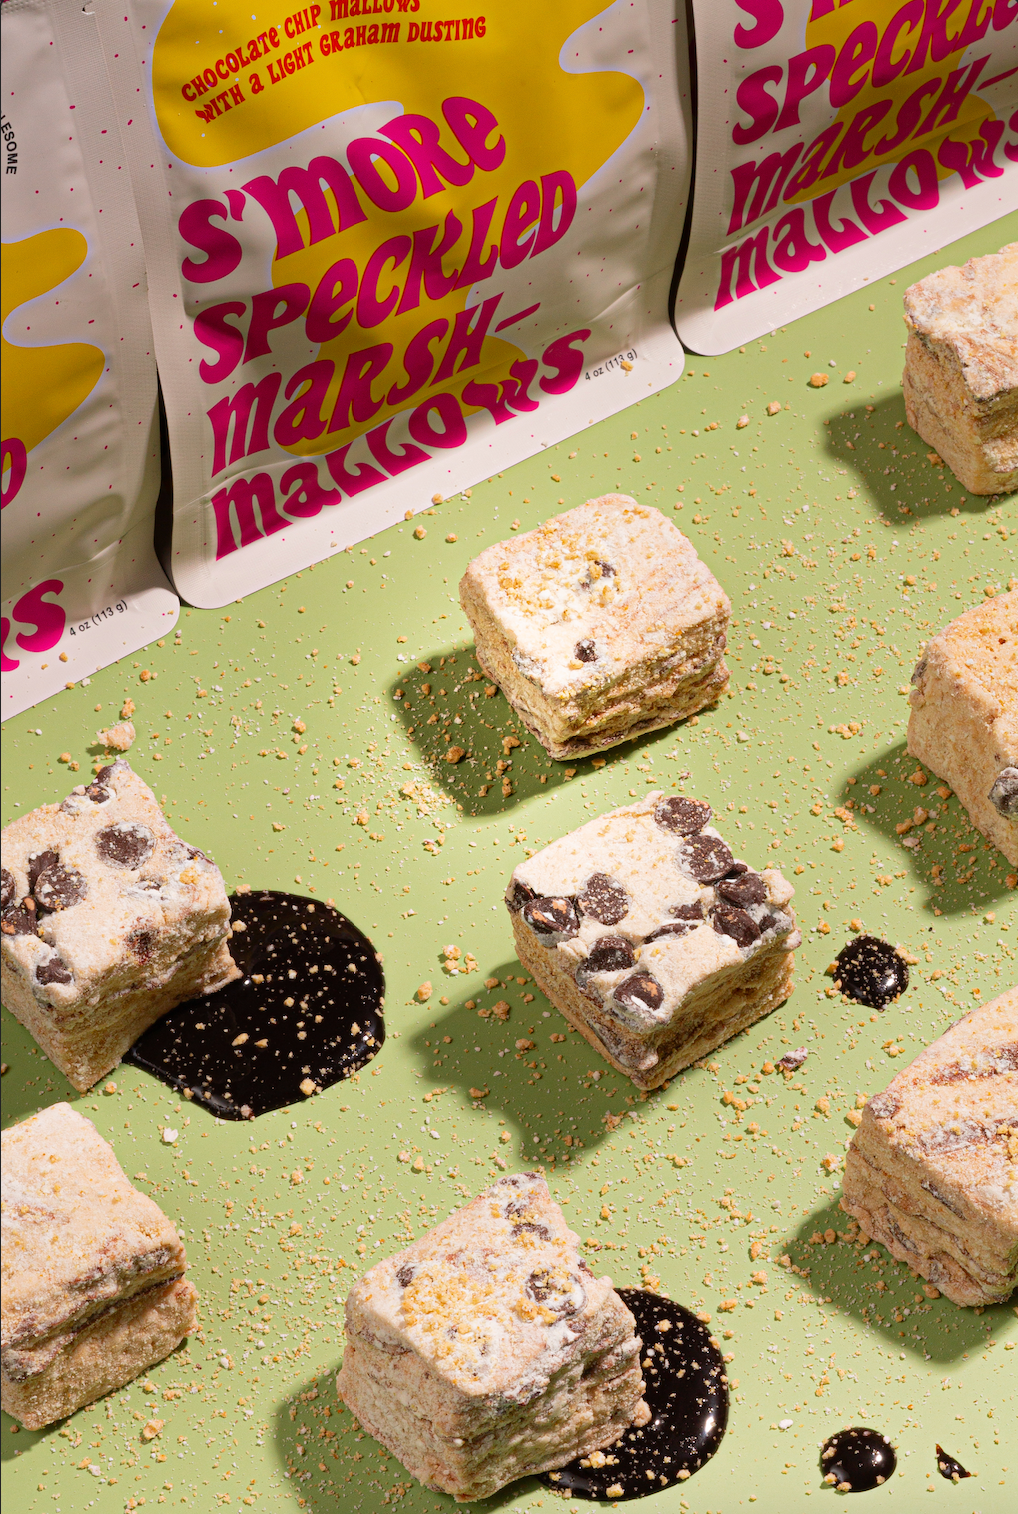 Handmade S'more Speckled Marshmallows